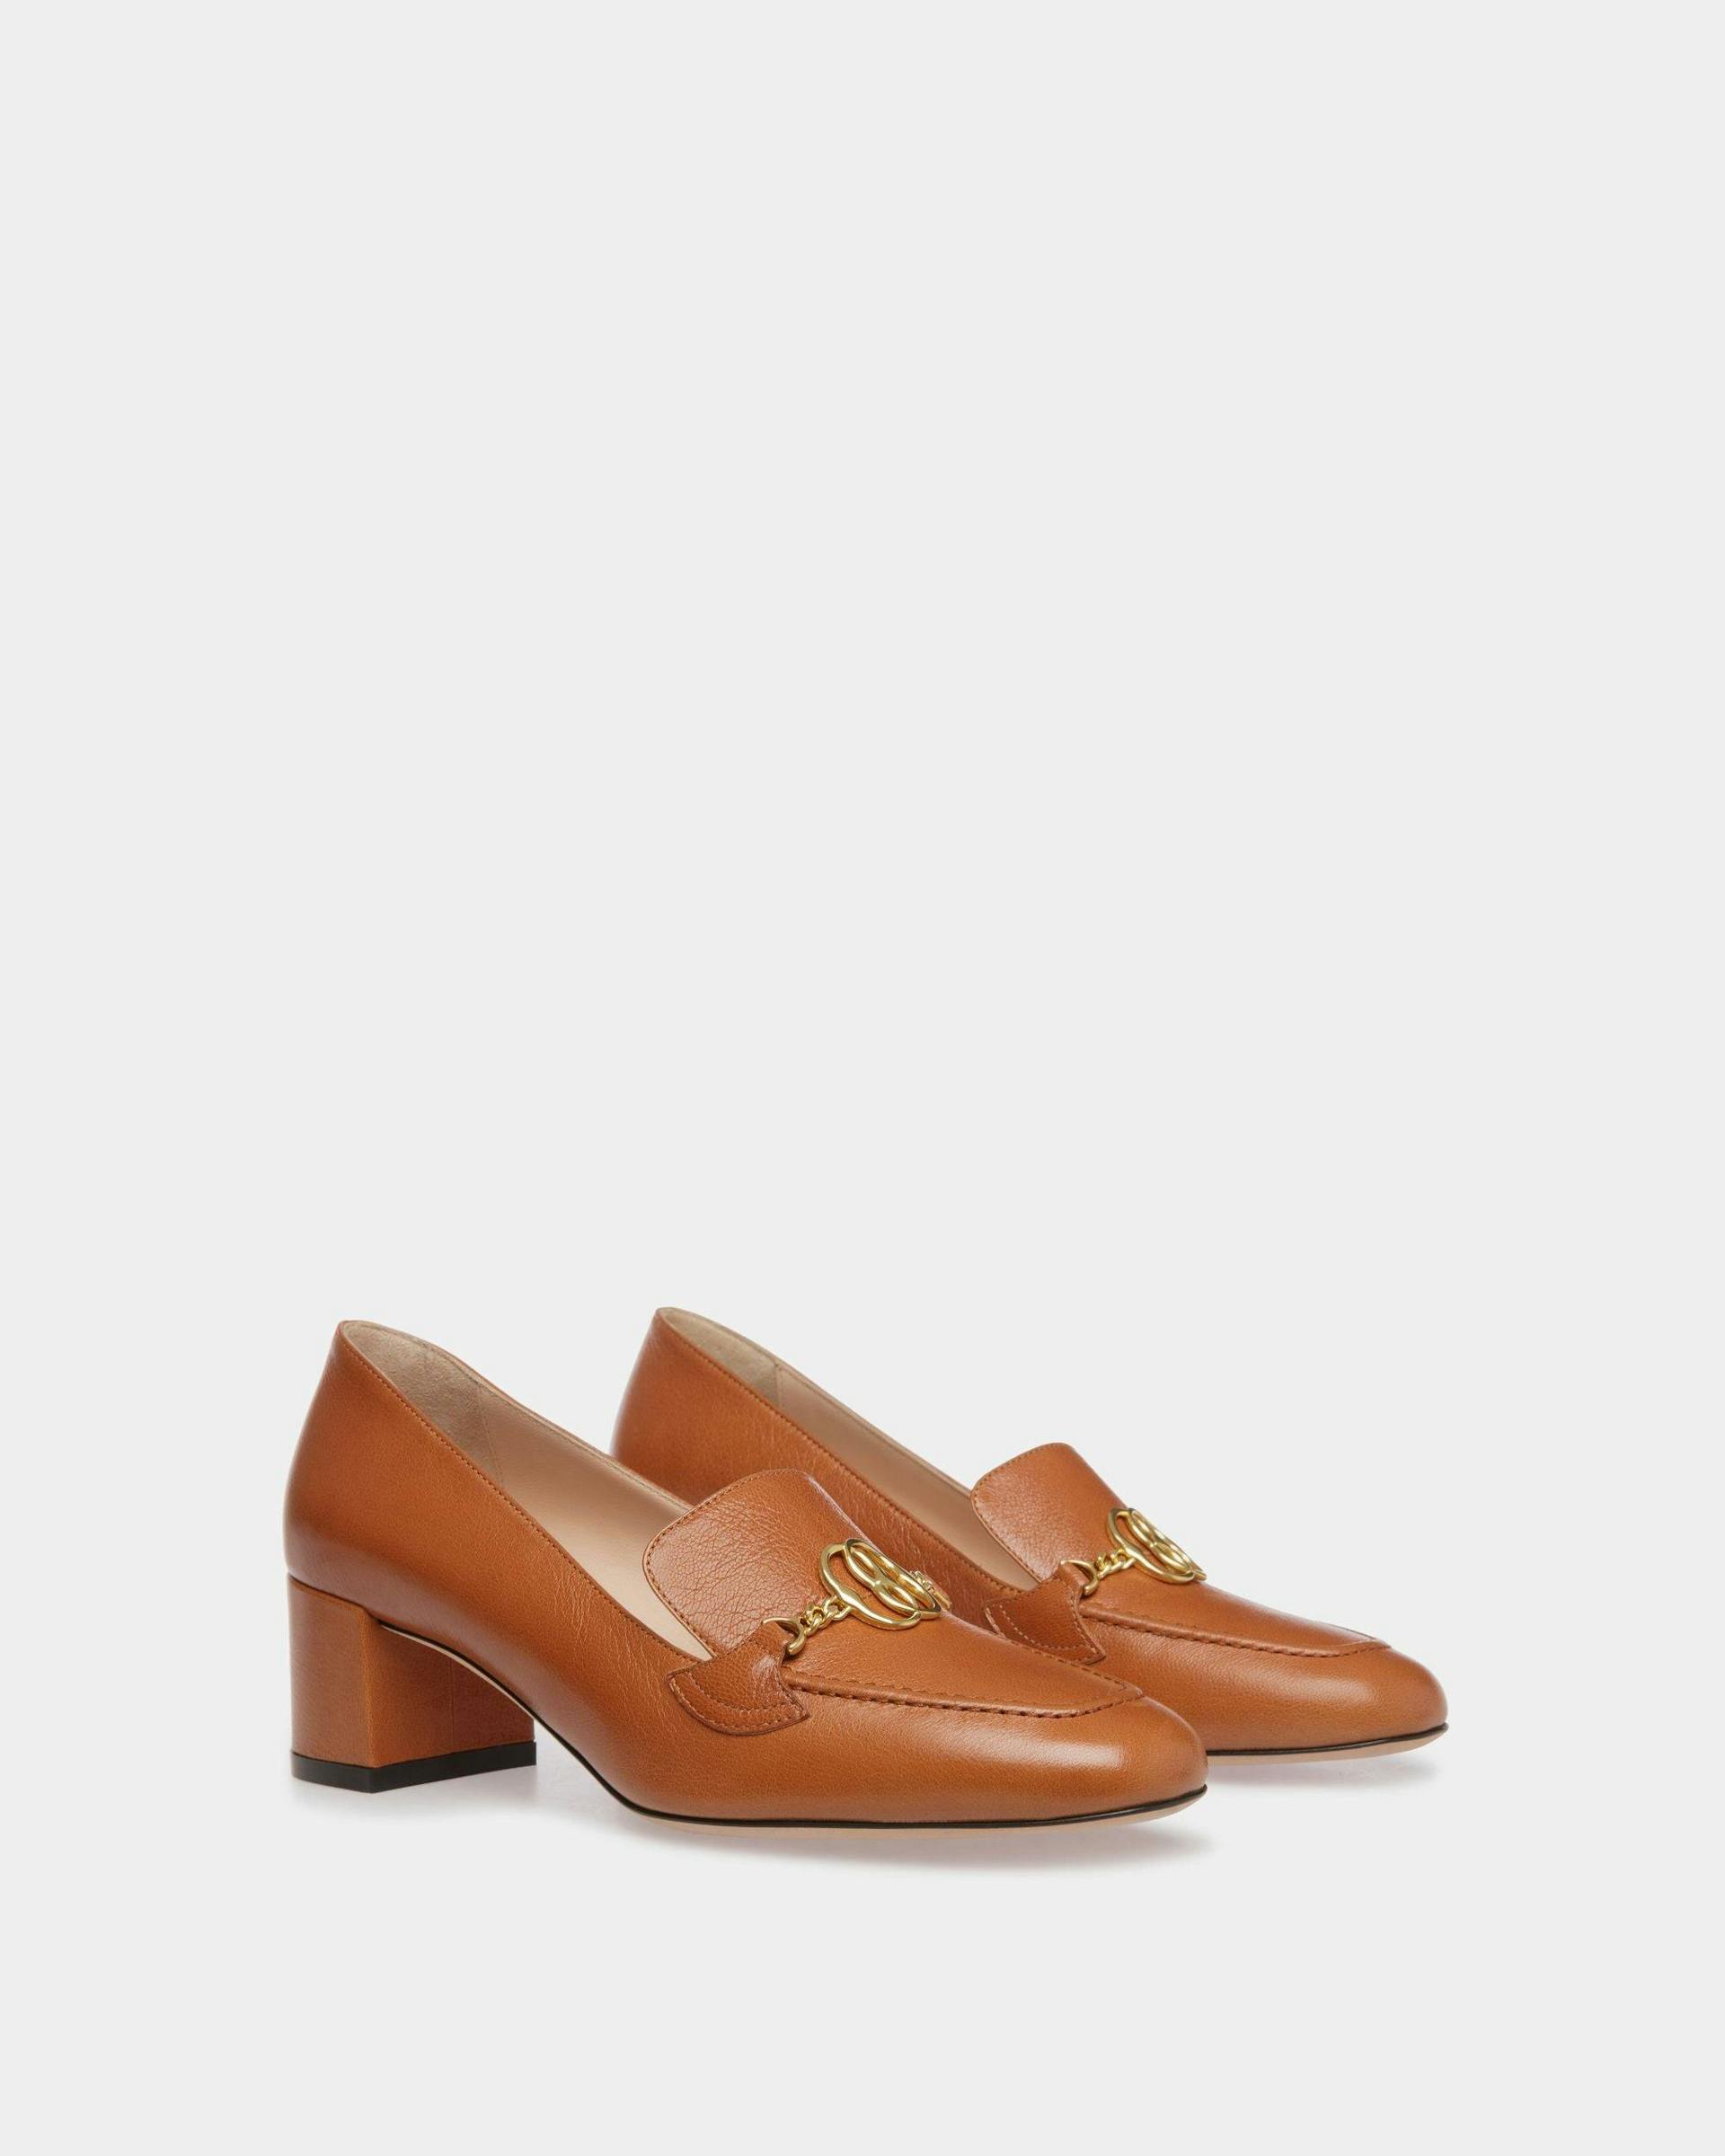 Emblem Pumps In Brown Leather - Women's - Bally - 03